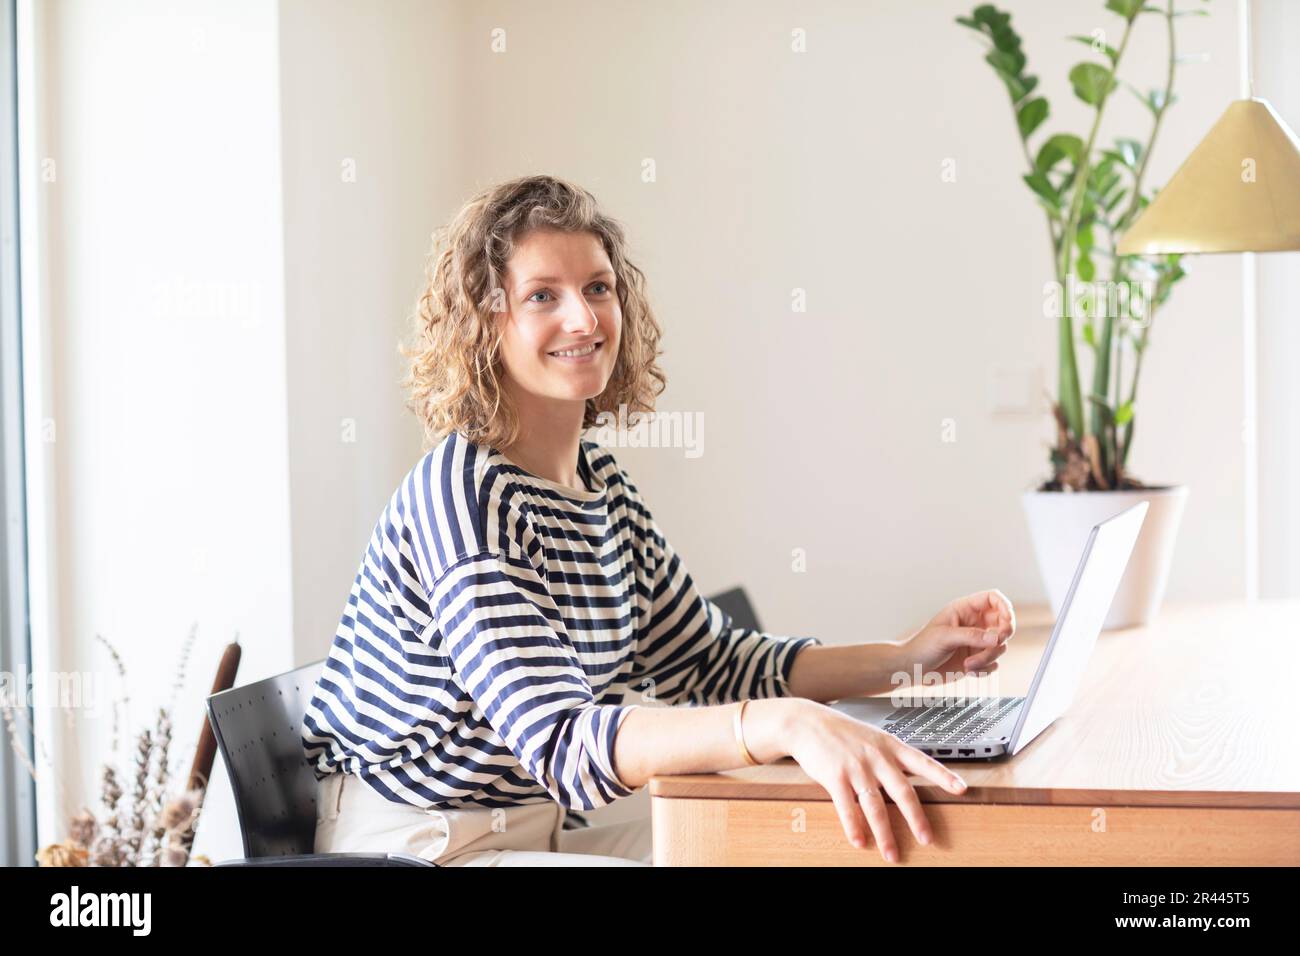 young woman sitting on a table in home office with laptop Stock Photo